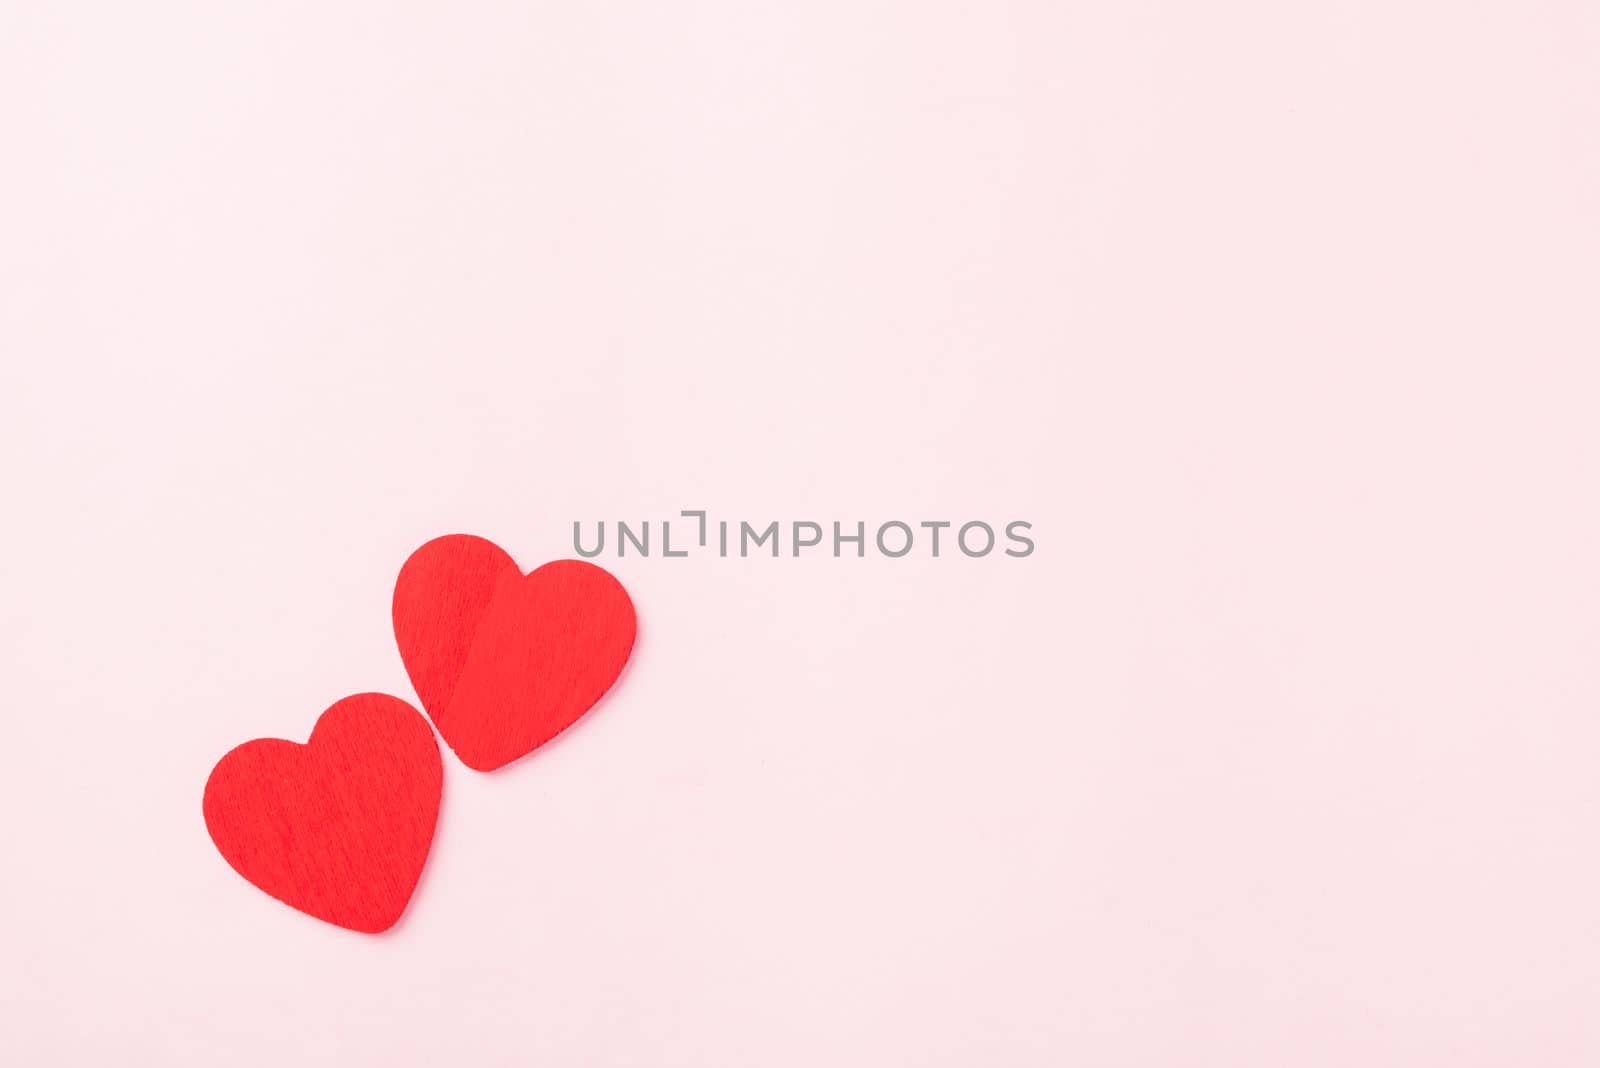 Valentines' day background. red hearts composition greeting card for love Valentines day concept isolated on pink background with copy space. Top View flat lay from above